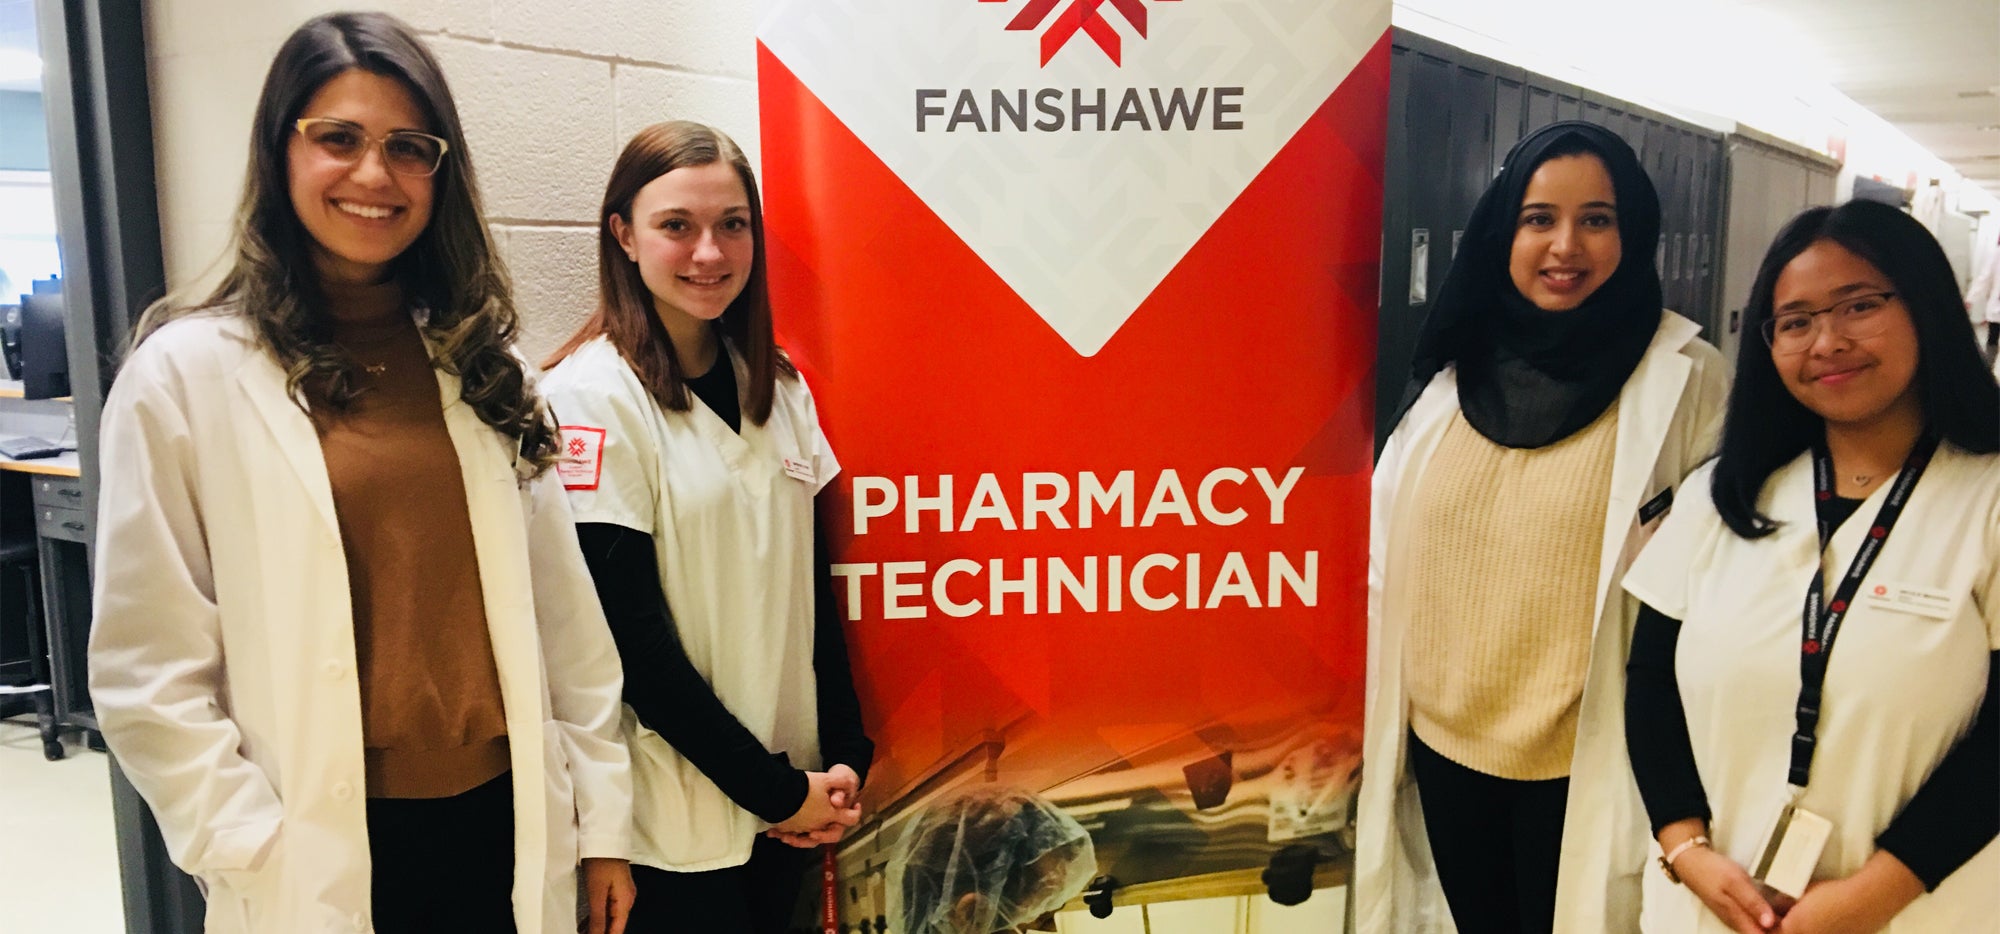 Waterloo Pharmacy students pose with Fanshawe students next to banner that says Pharmacy Technician